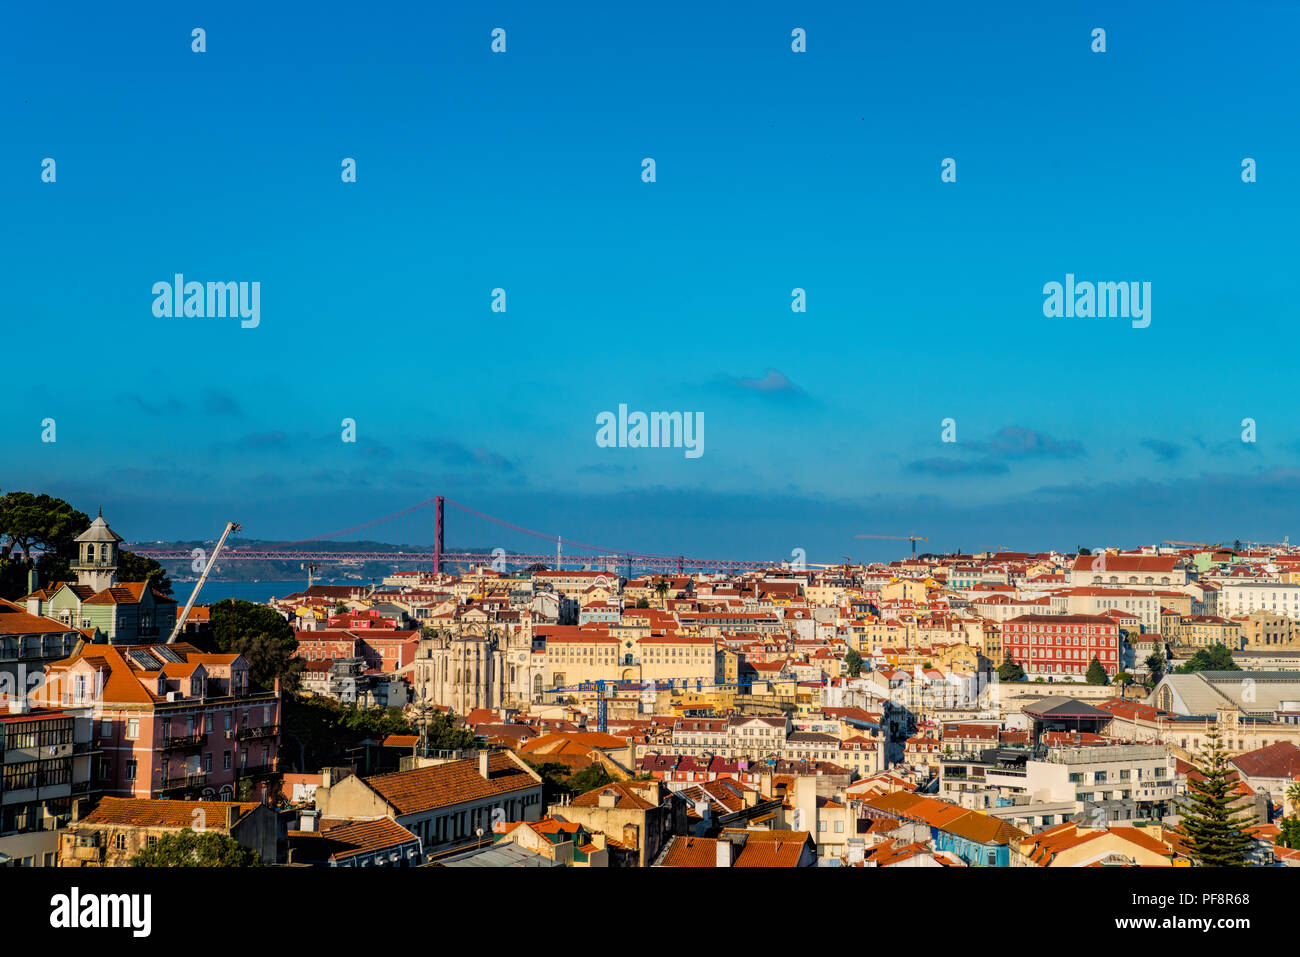 Old Town Lisbon. street view of typical houses in Lisbon, Portugal, Europe Stock Photo